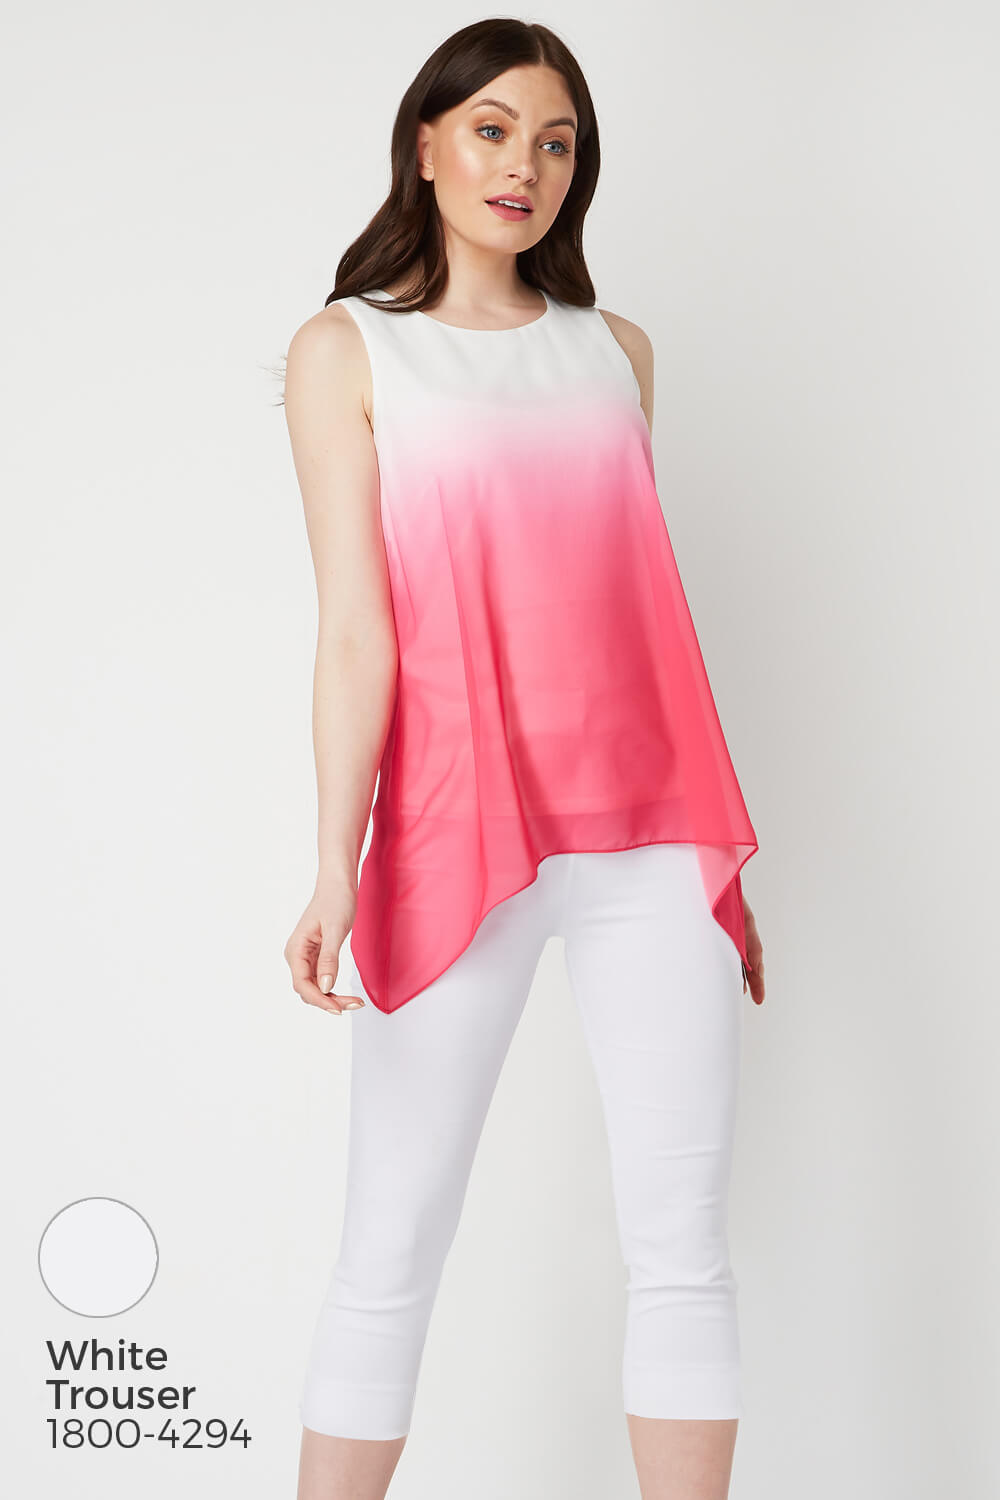 PINK Ombre Print Overlay Top, Image 7 of 8